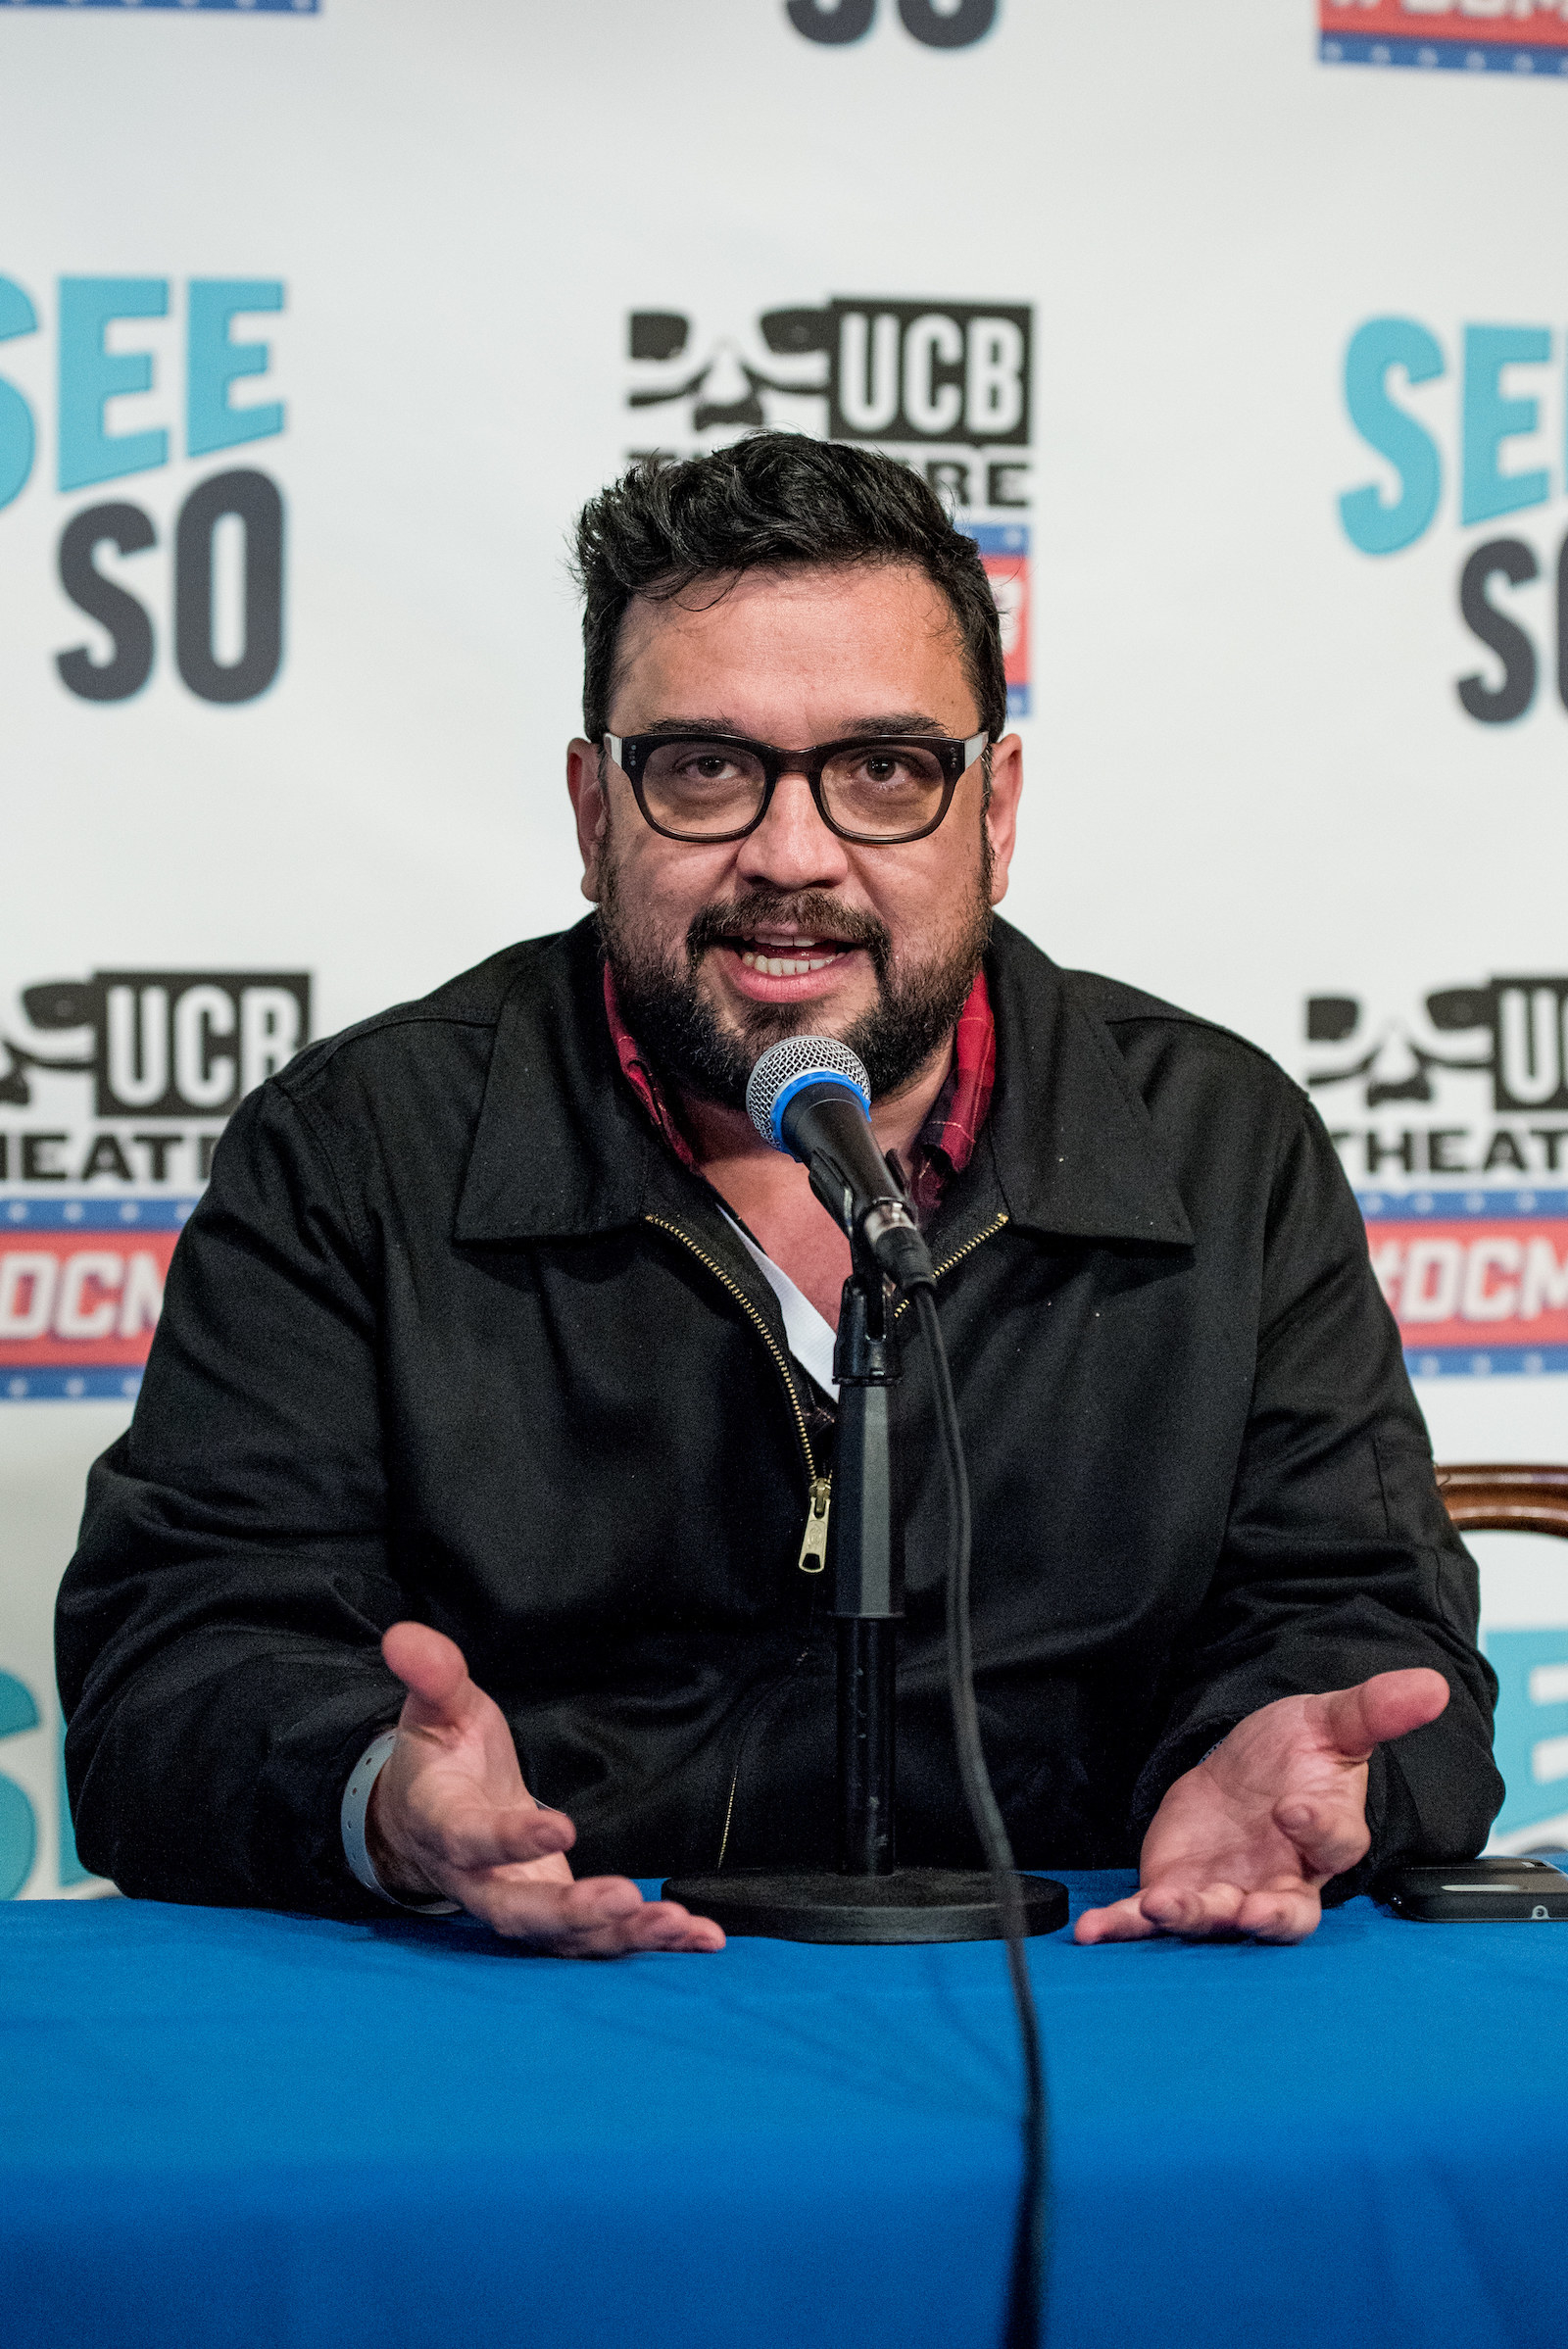 Sanz talks into a microphone with his hands resting on a table at a panel